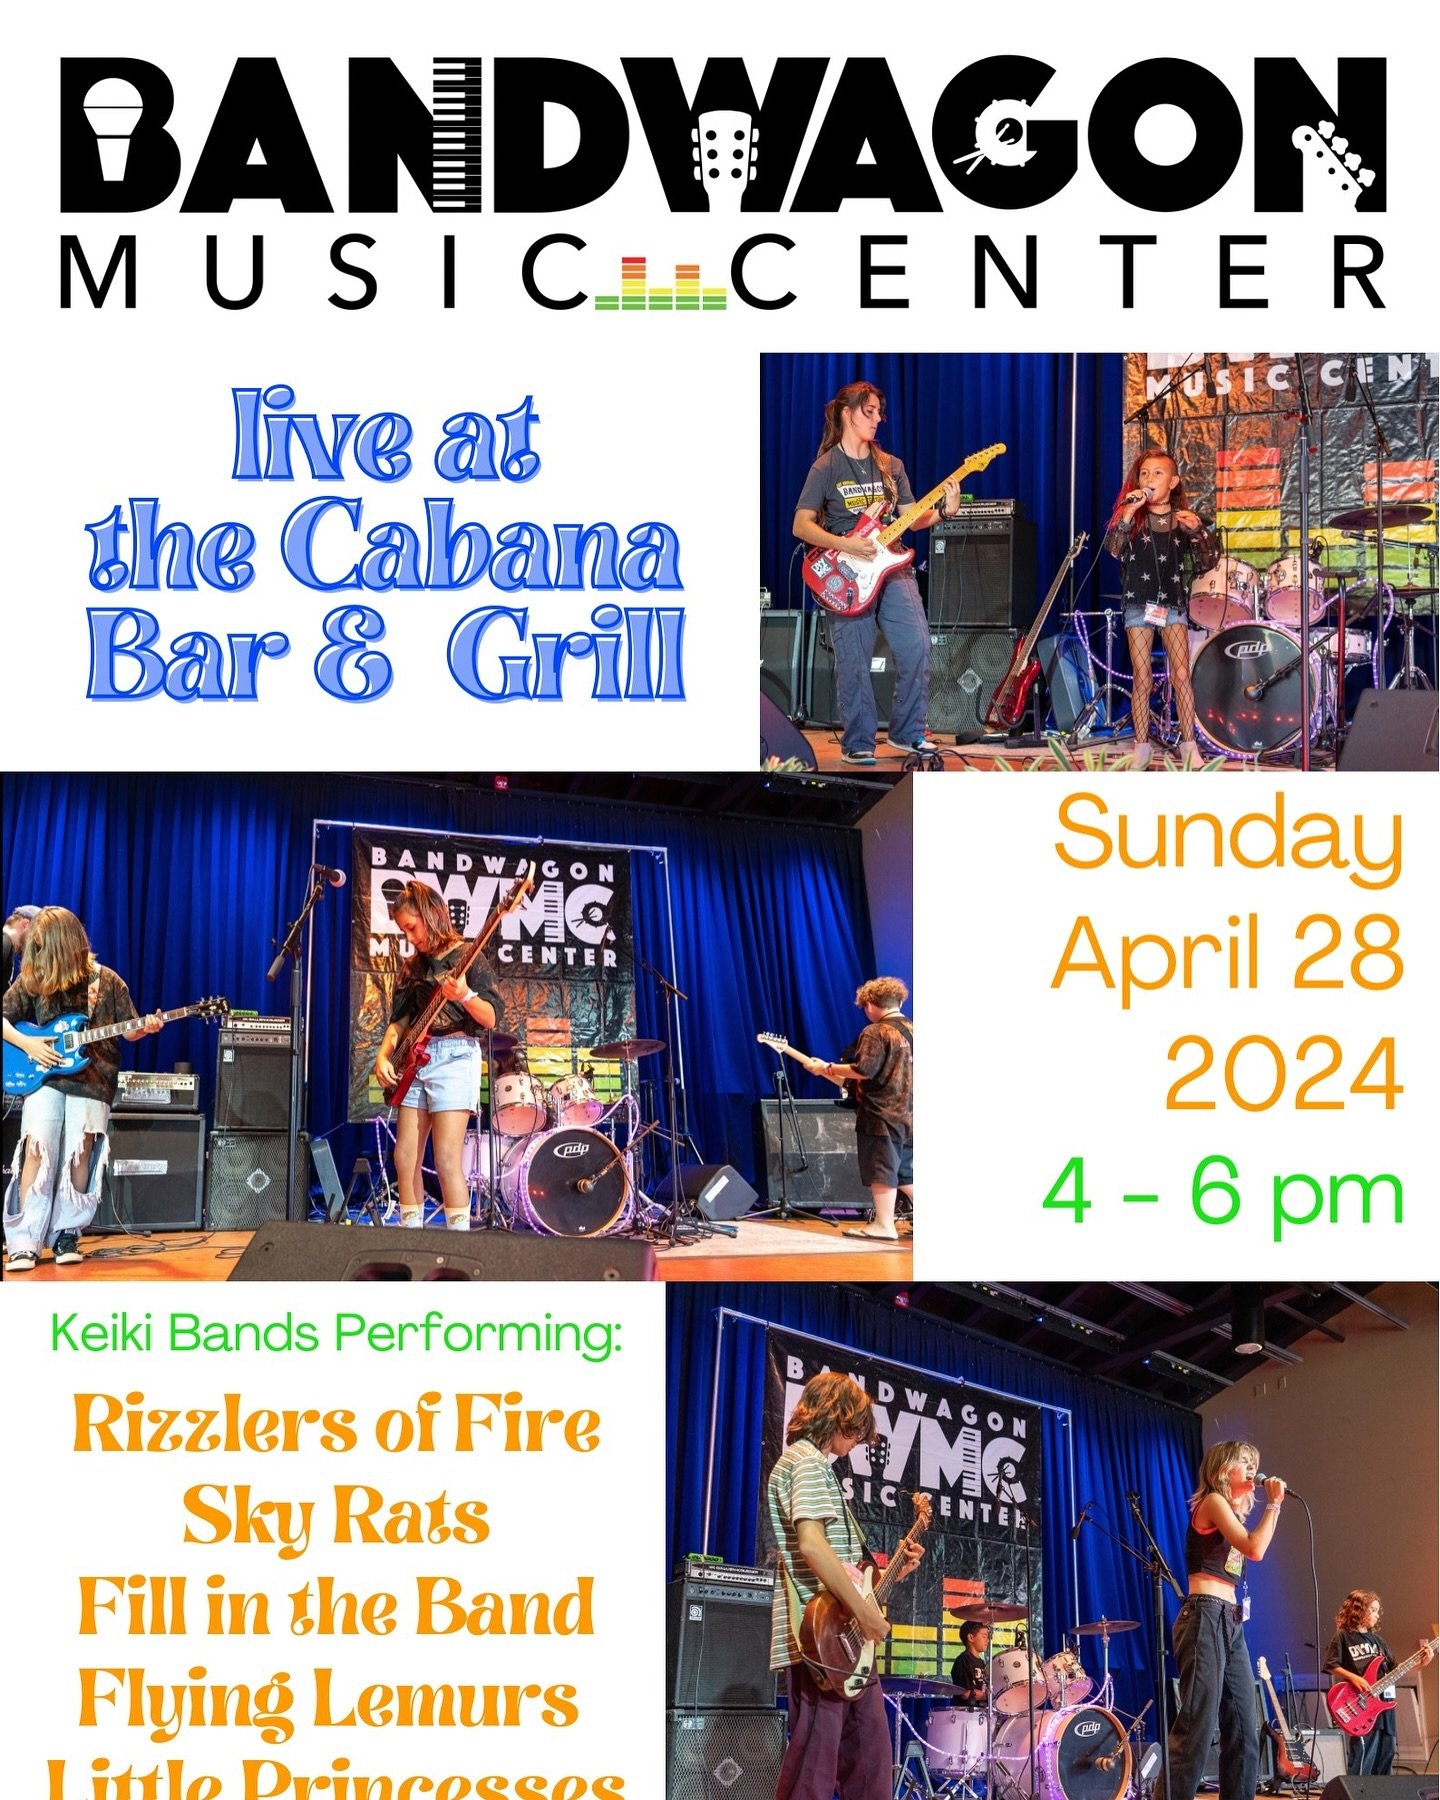 This is happening tomorrow!!! Be sure to make reservations if there are any left! #performance #donation #fundraiser @bandwagonmusiccenter @poipubeachathleticclub @thegardenisland @islandradio989 #livemusic @cherieboudreau @magalie.delangel @craew16